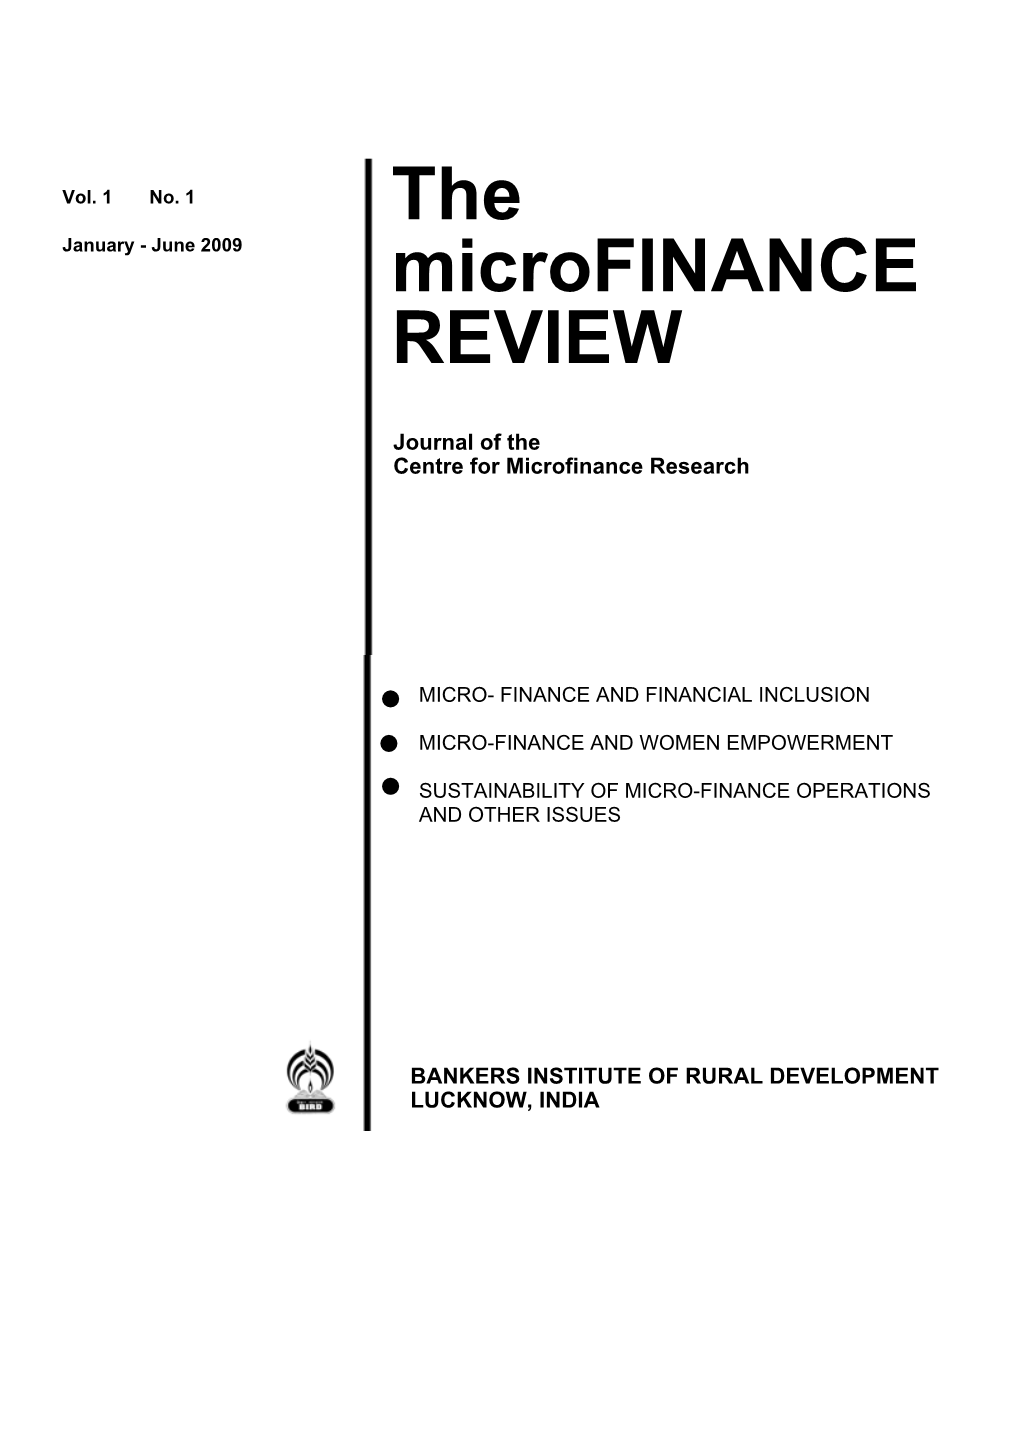 The Microfinance REVIEW